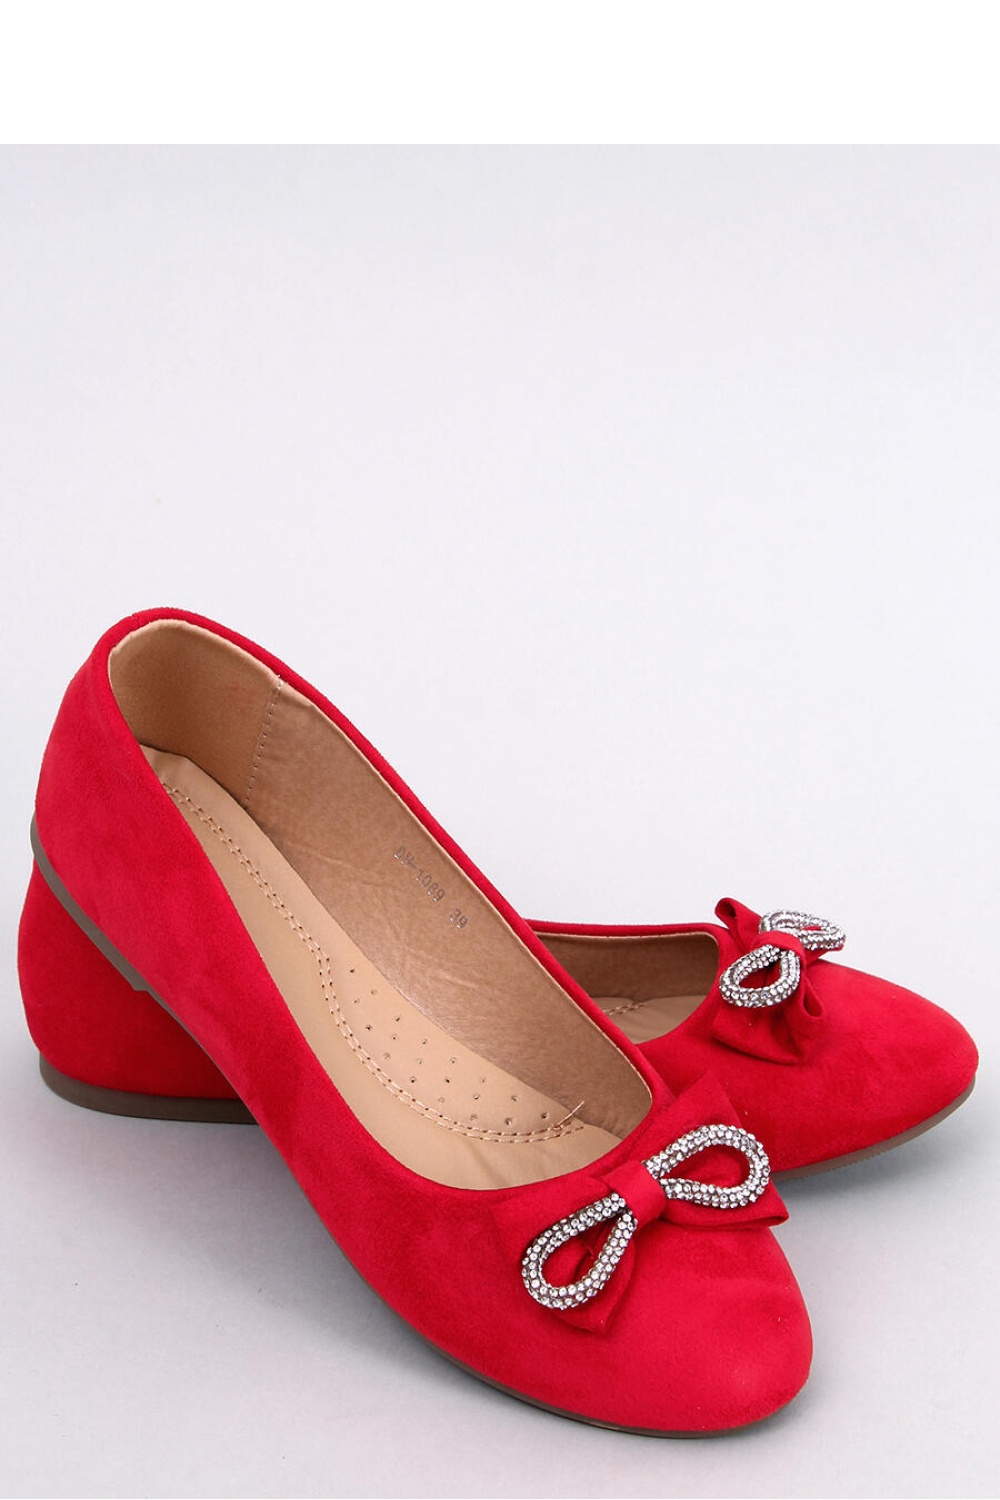  Ballet flats model 178760 Inello  red